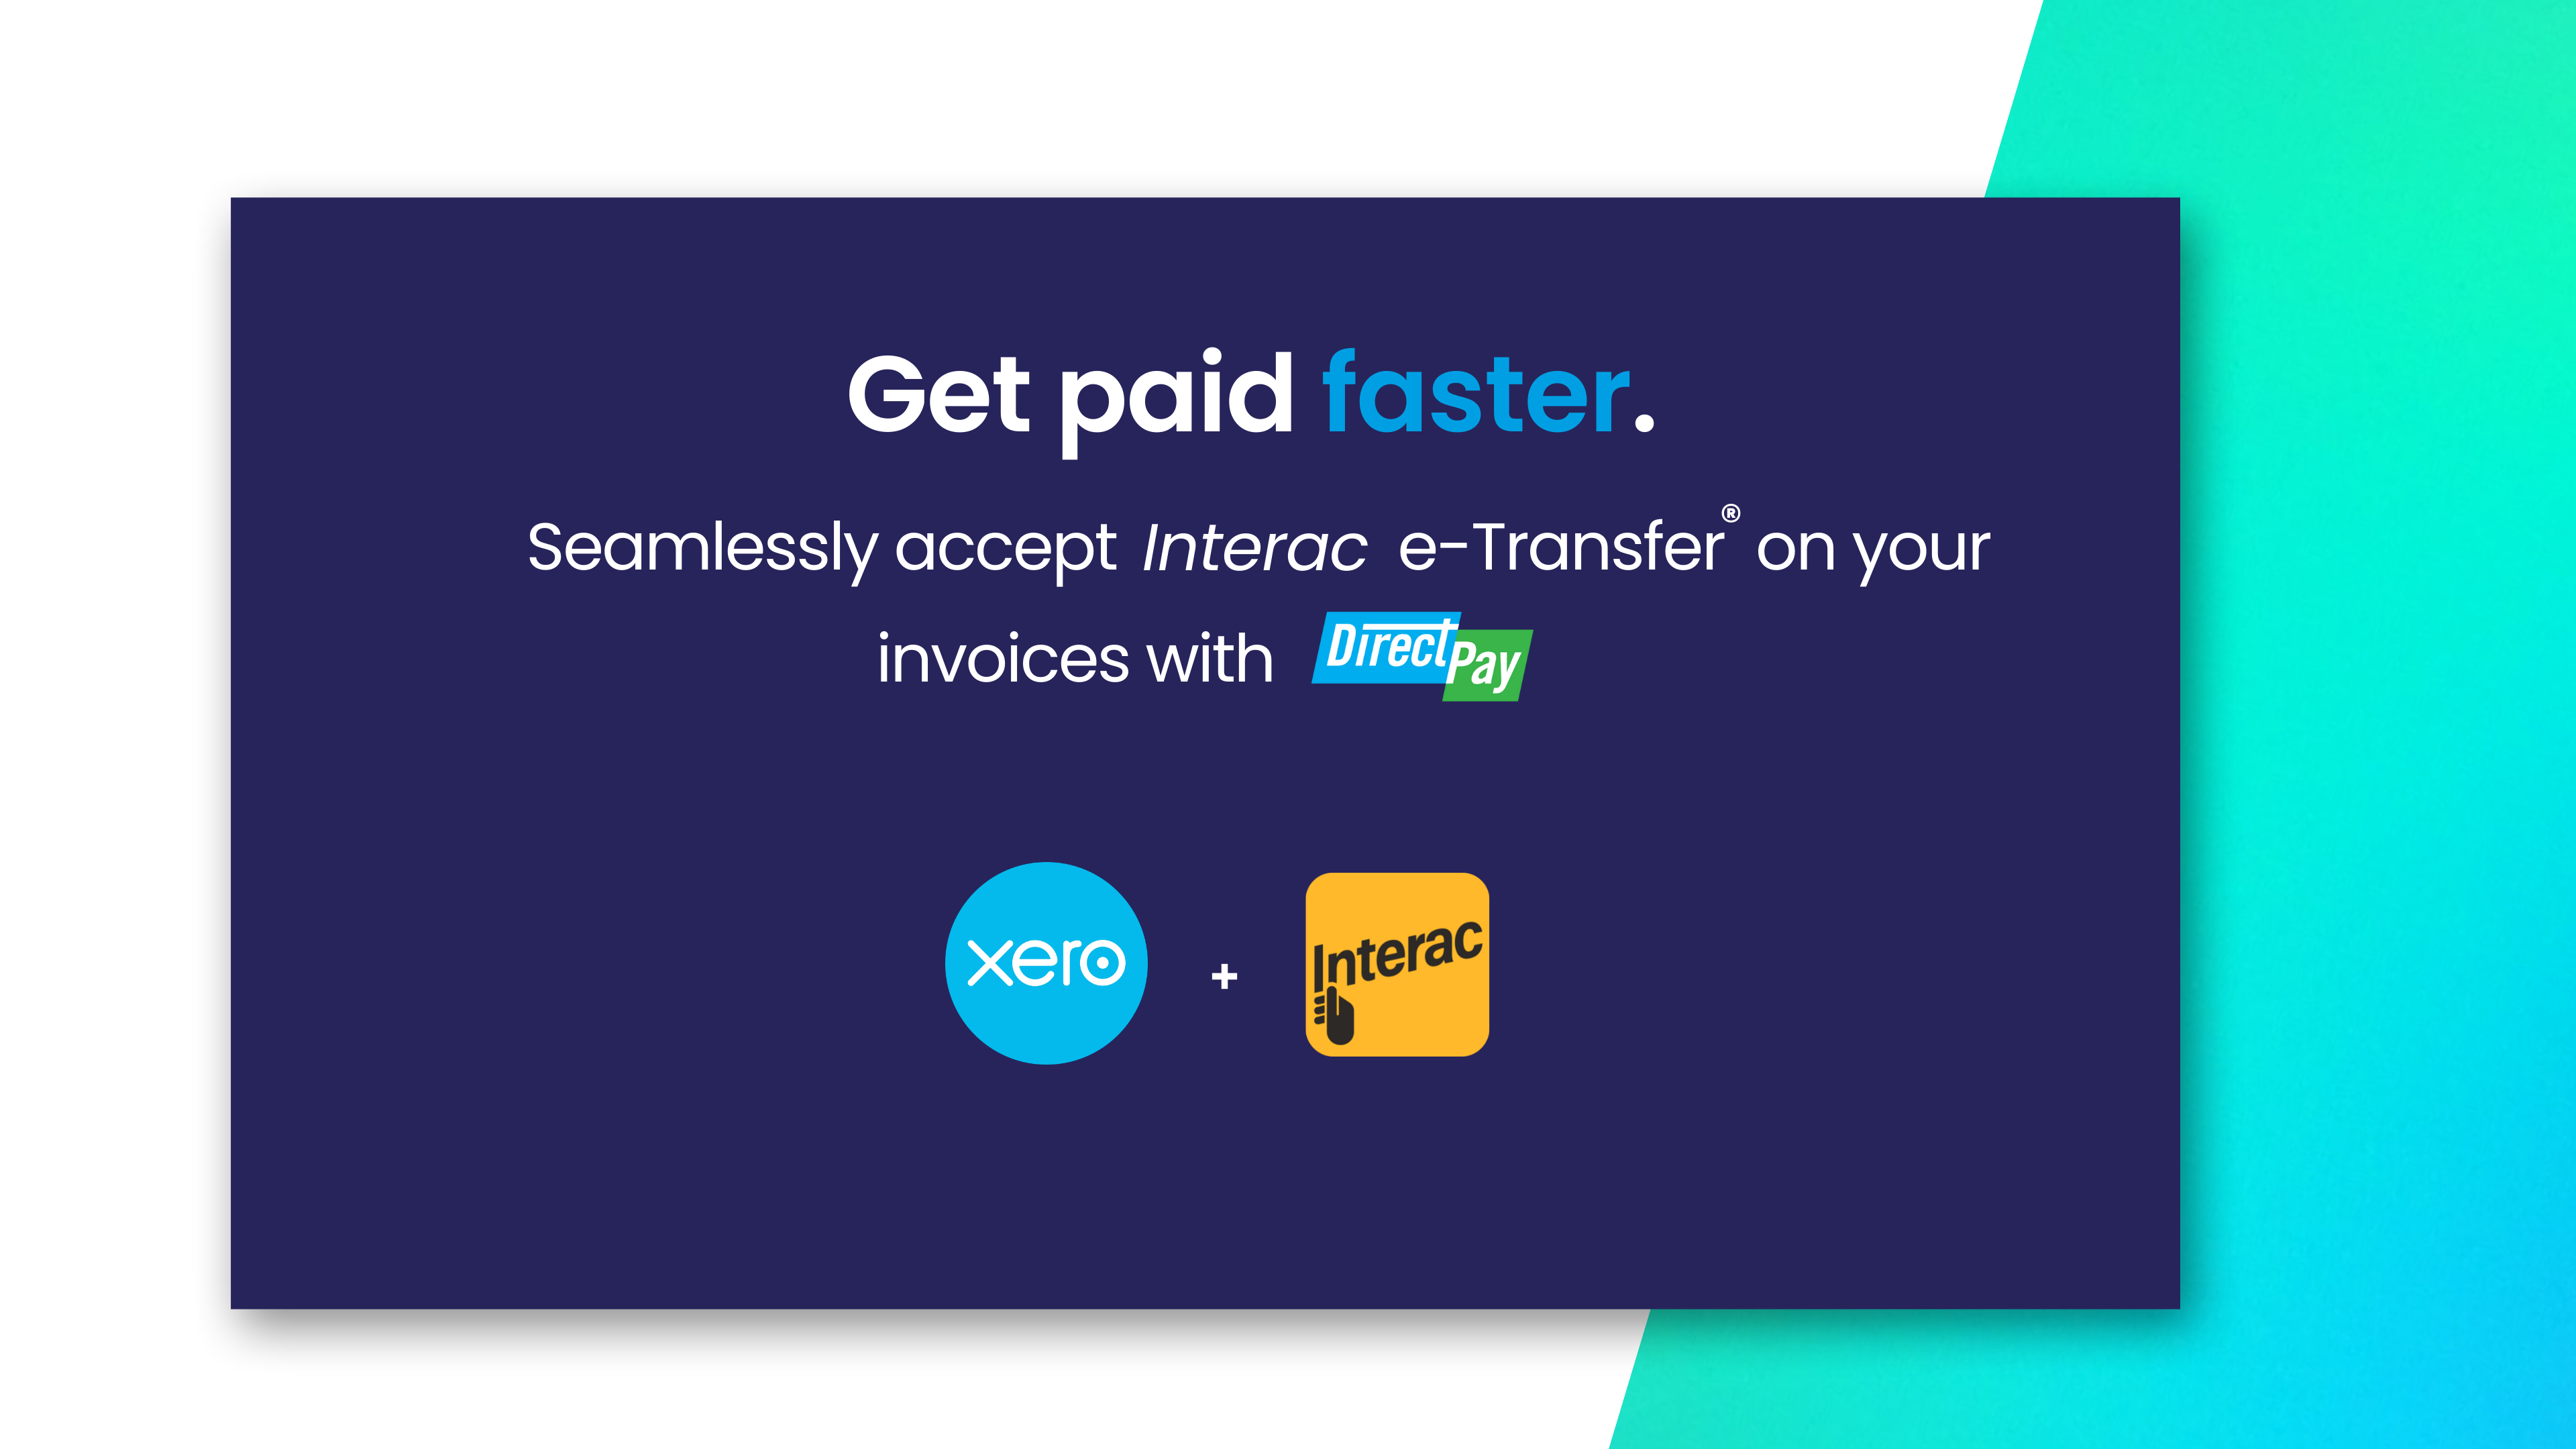 Interac e-Transfer with DirectPay